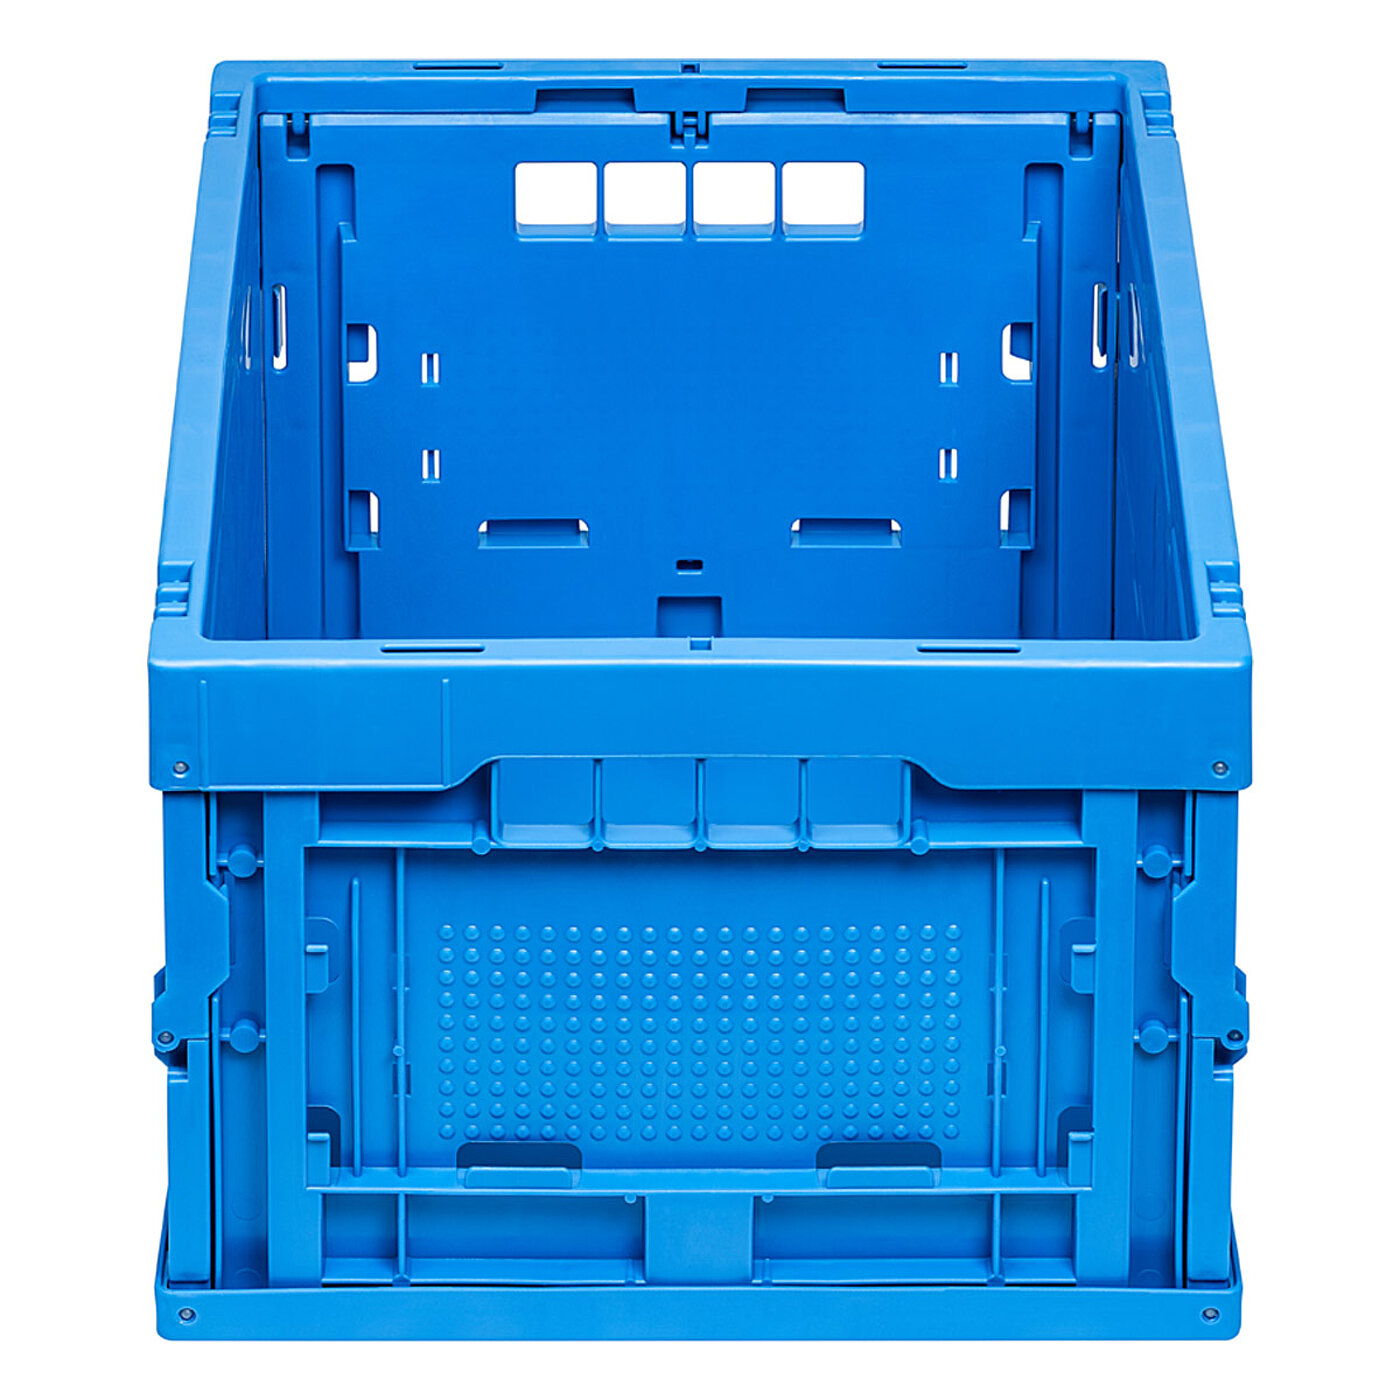 a blue foldable box made of plastics, in face side view, isolated on white background

